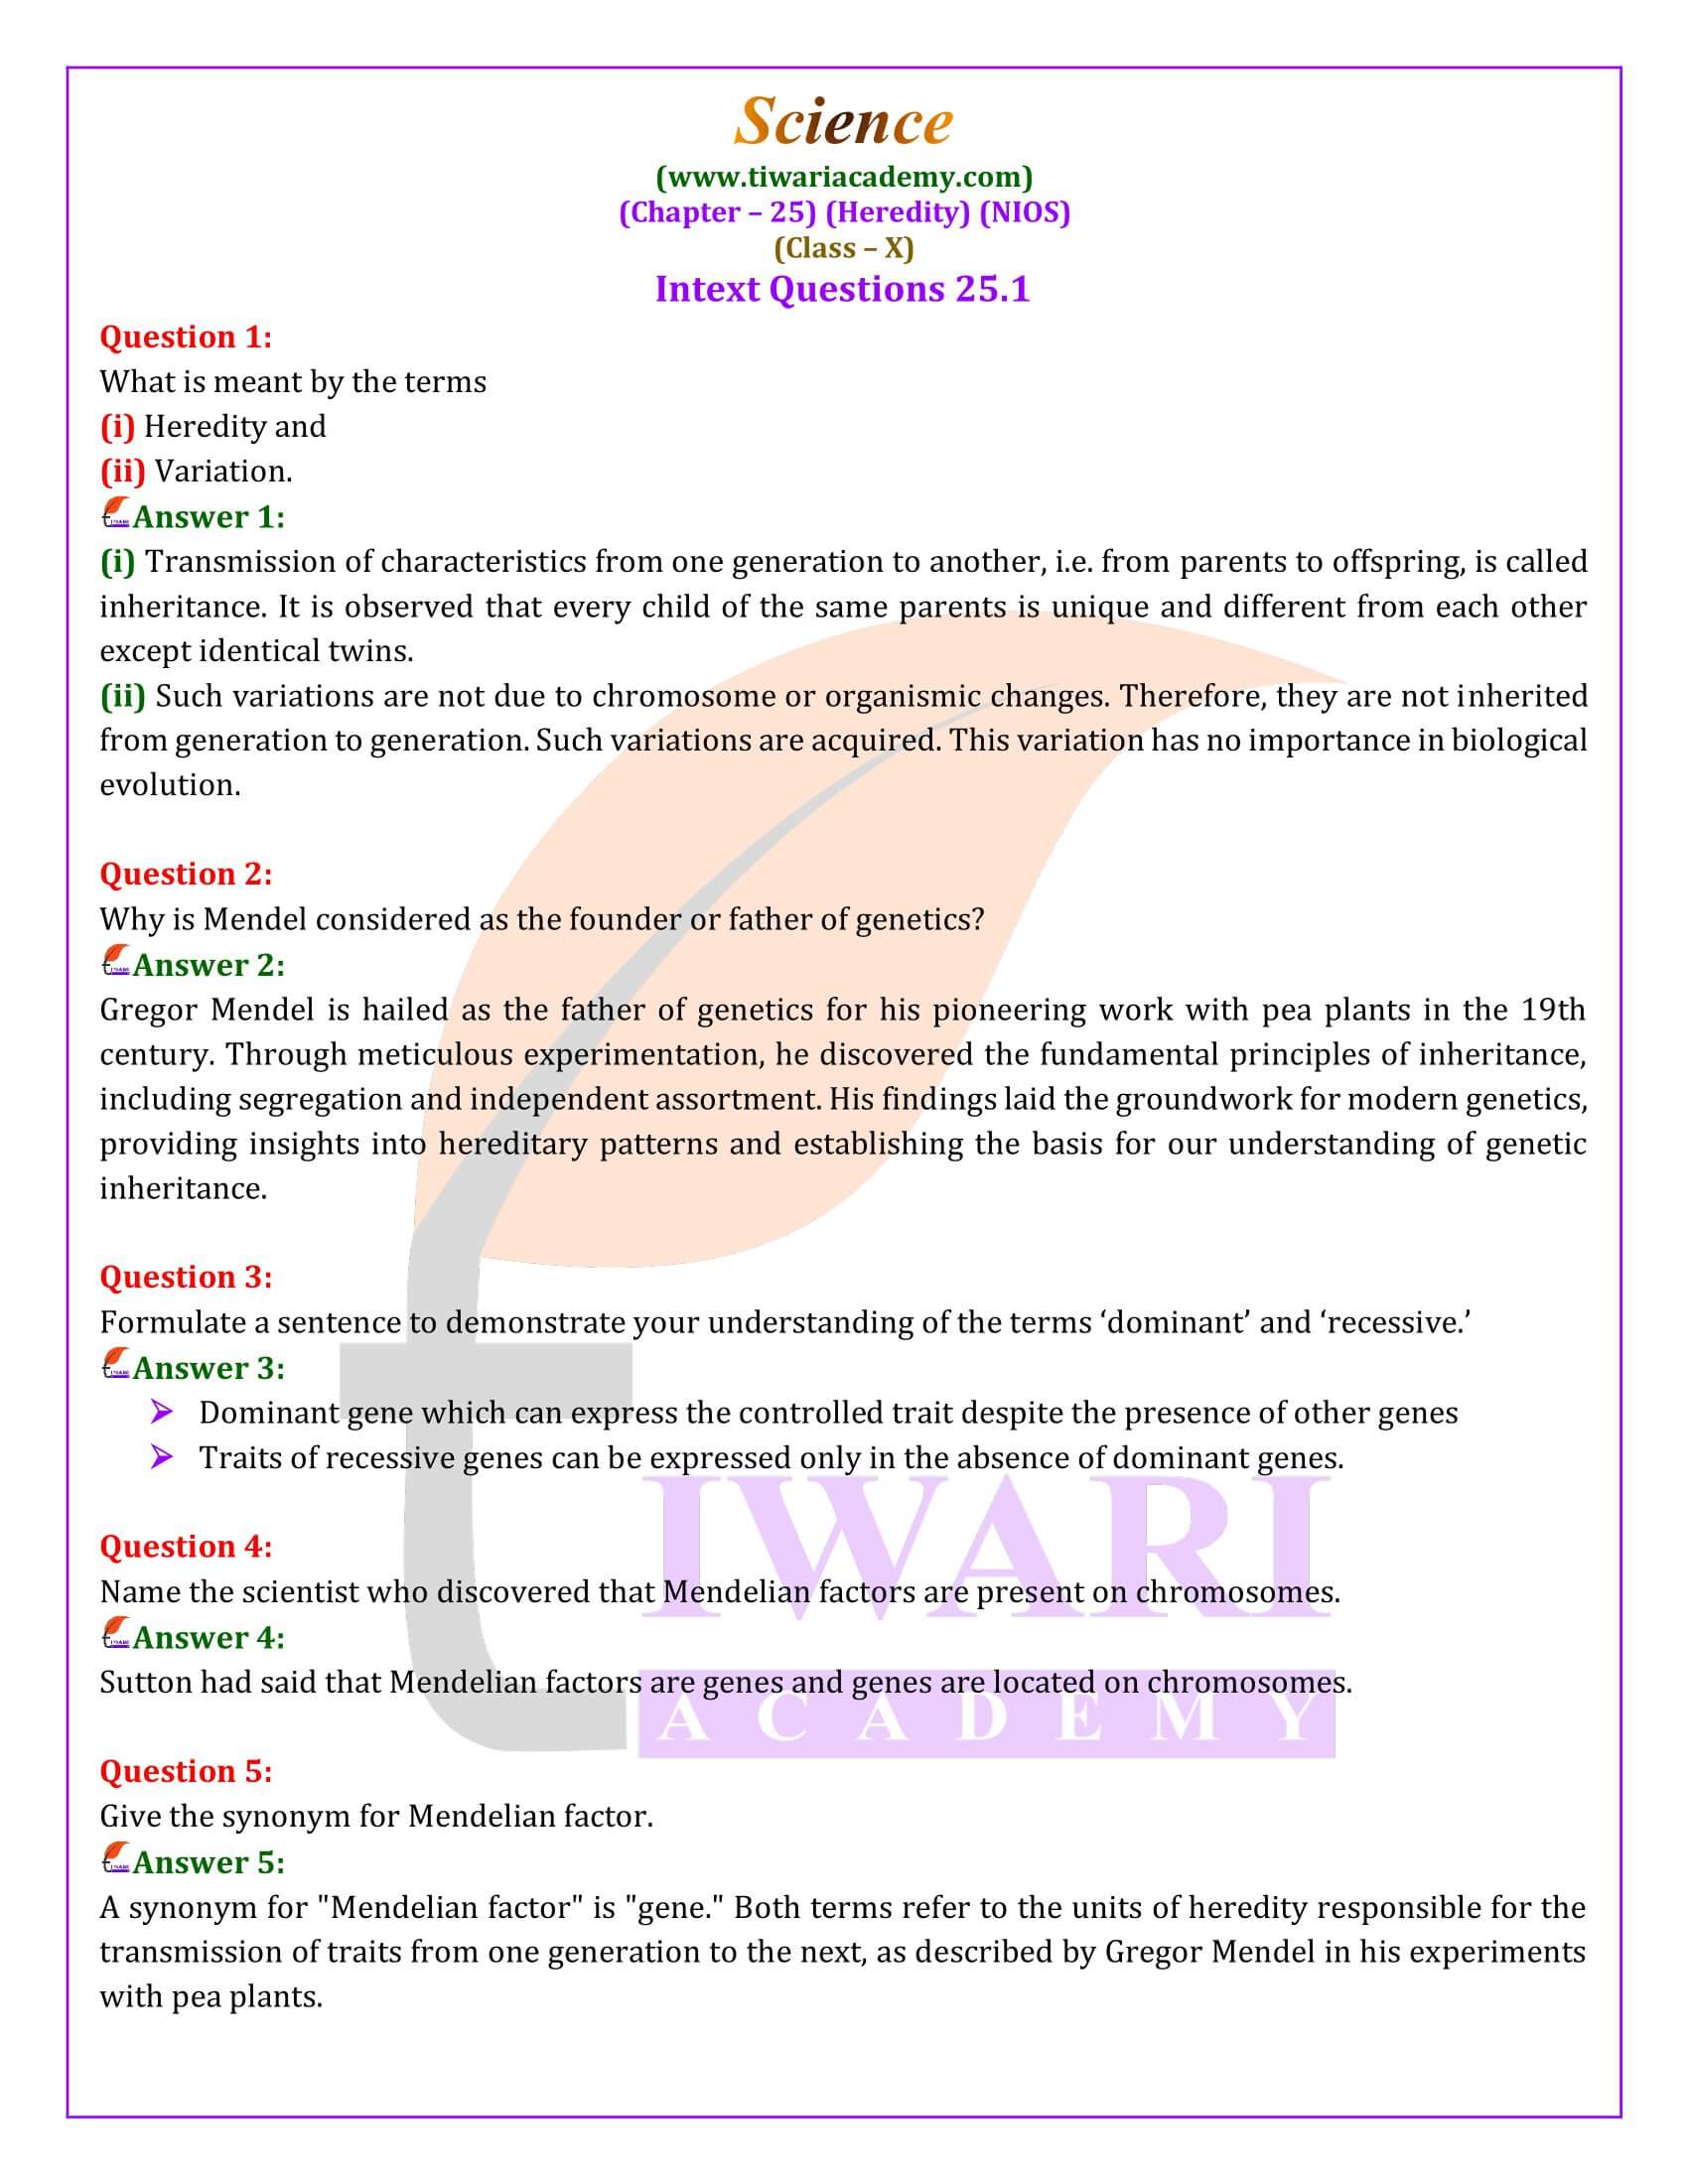 NIOS Class 10 Science Chapter 25 Heredity Question Answers